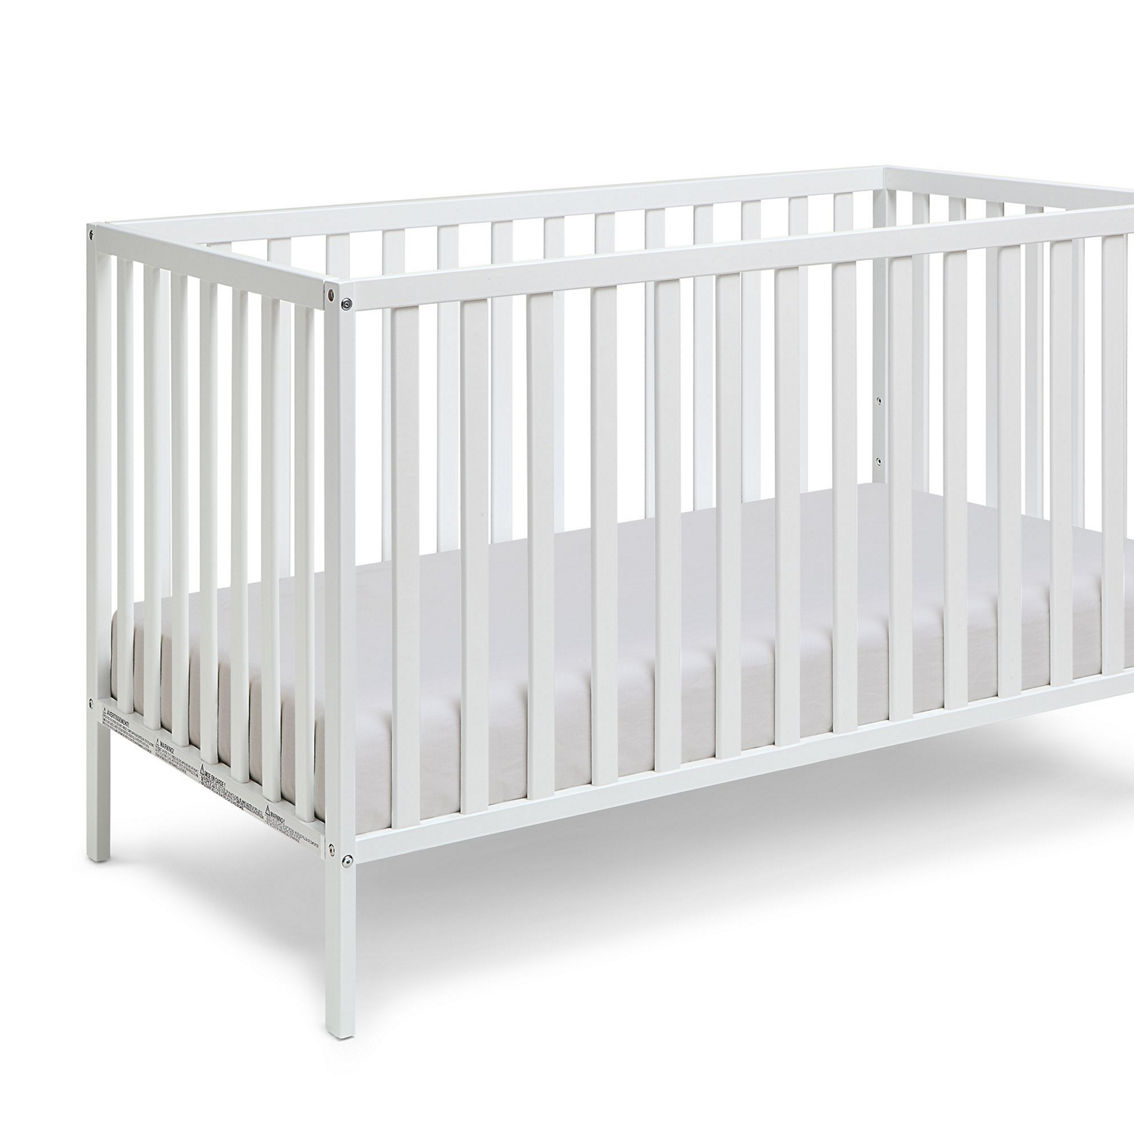 Suite Bebe Palmer 3-in-1 Convertible Island Crib White - Image 3 of 5